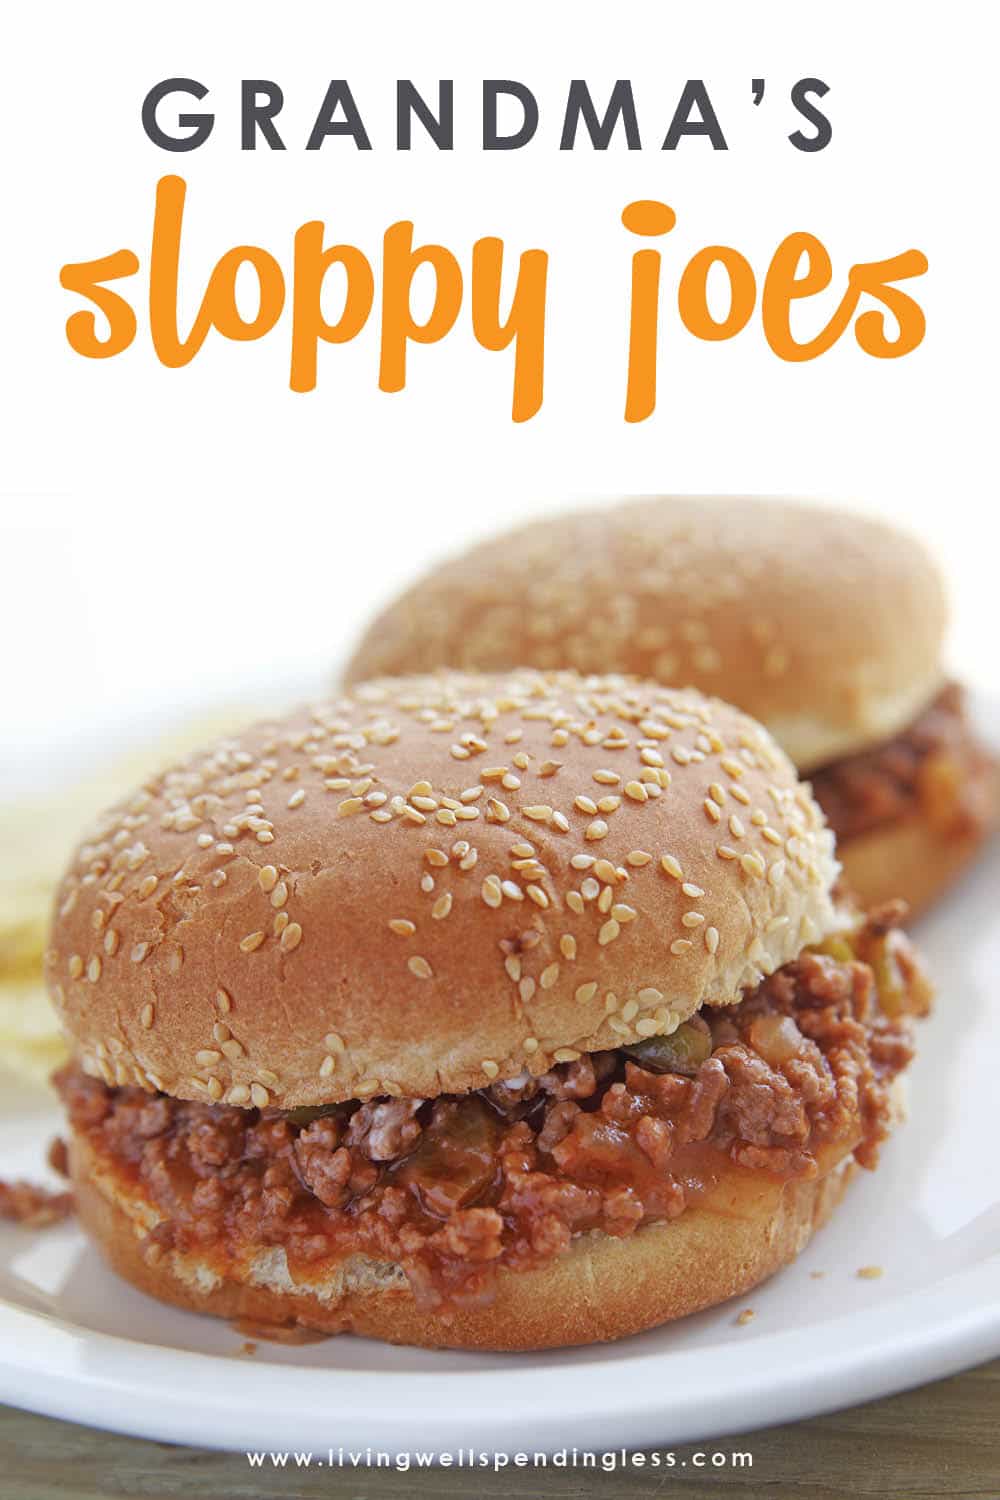 Need a new family favorite meal? This delicious recipe is straight out of my Grandmother's recipe box. Full of flavor, it whips up in minutes to serve a crowd and is freezer friendly too! It can also be made vegetarian, check it out! #vegetarian #easyrecipe #freezermeals #sloppyjoes